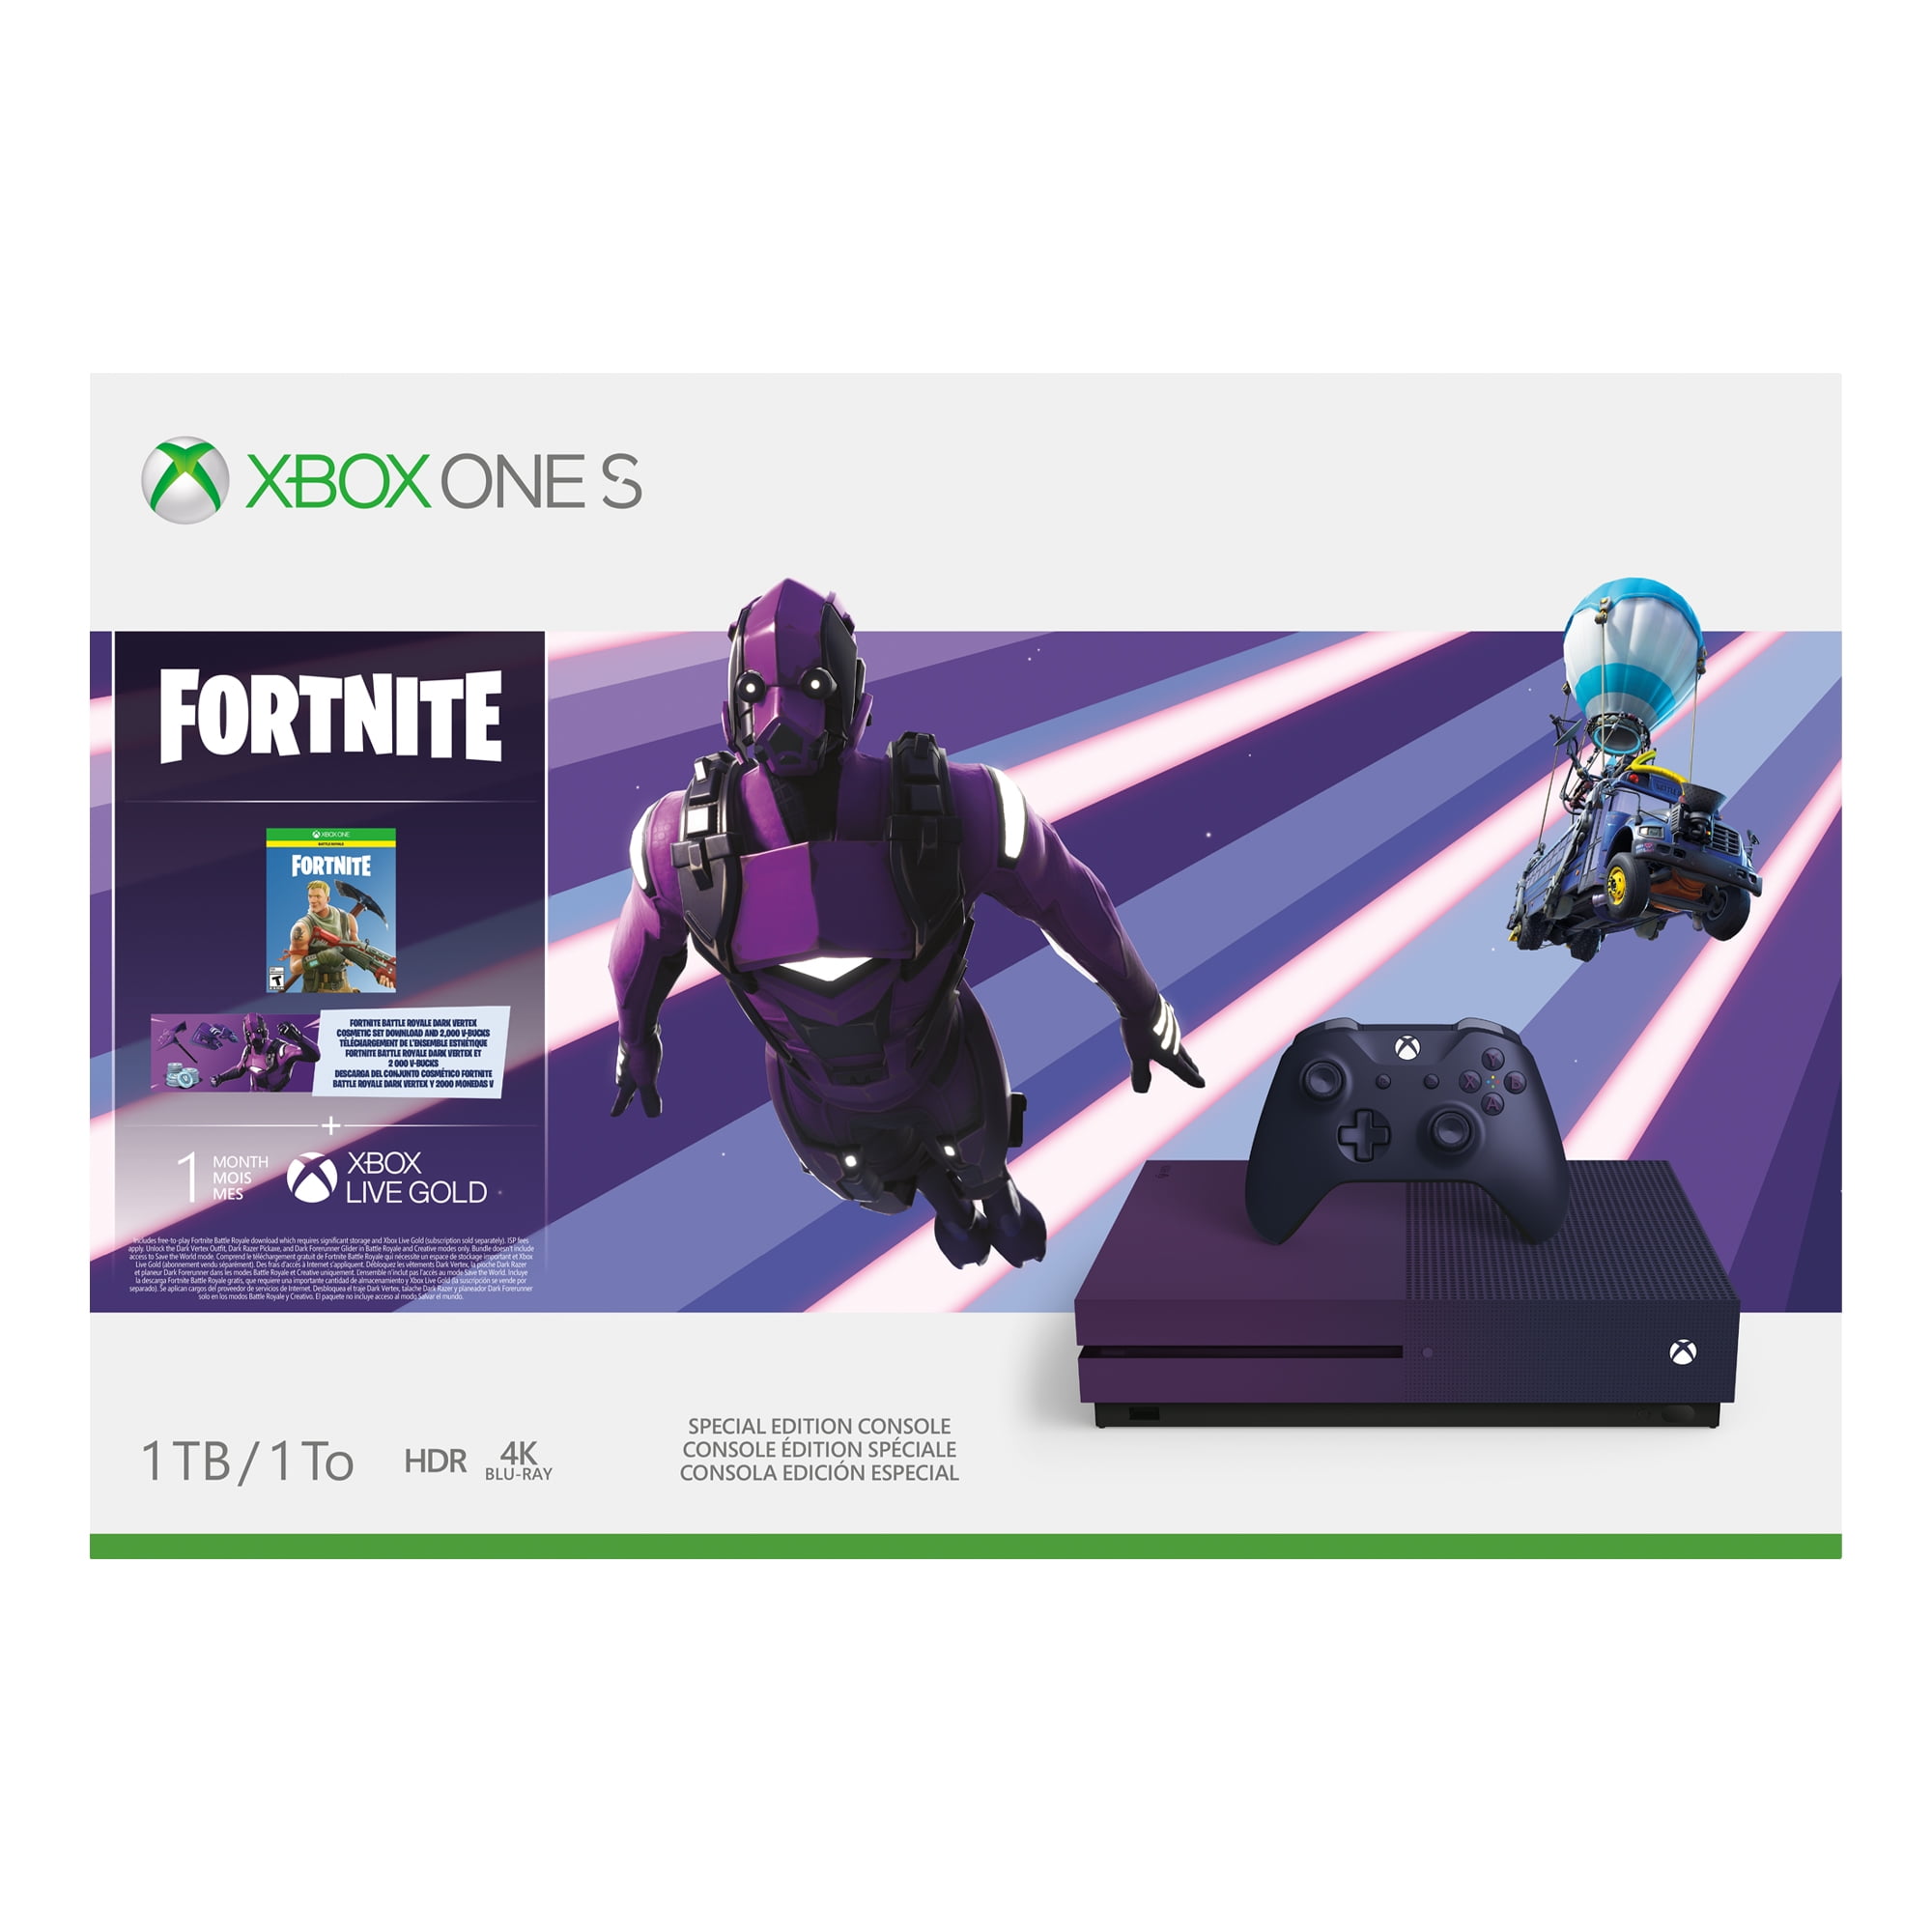 Fortnite Save the World FREE on Xbox One here's how to play without  paying, Gaming, Entertainment